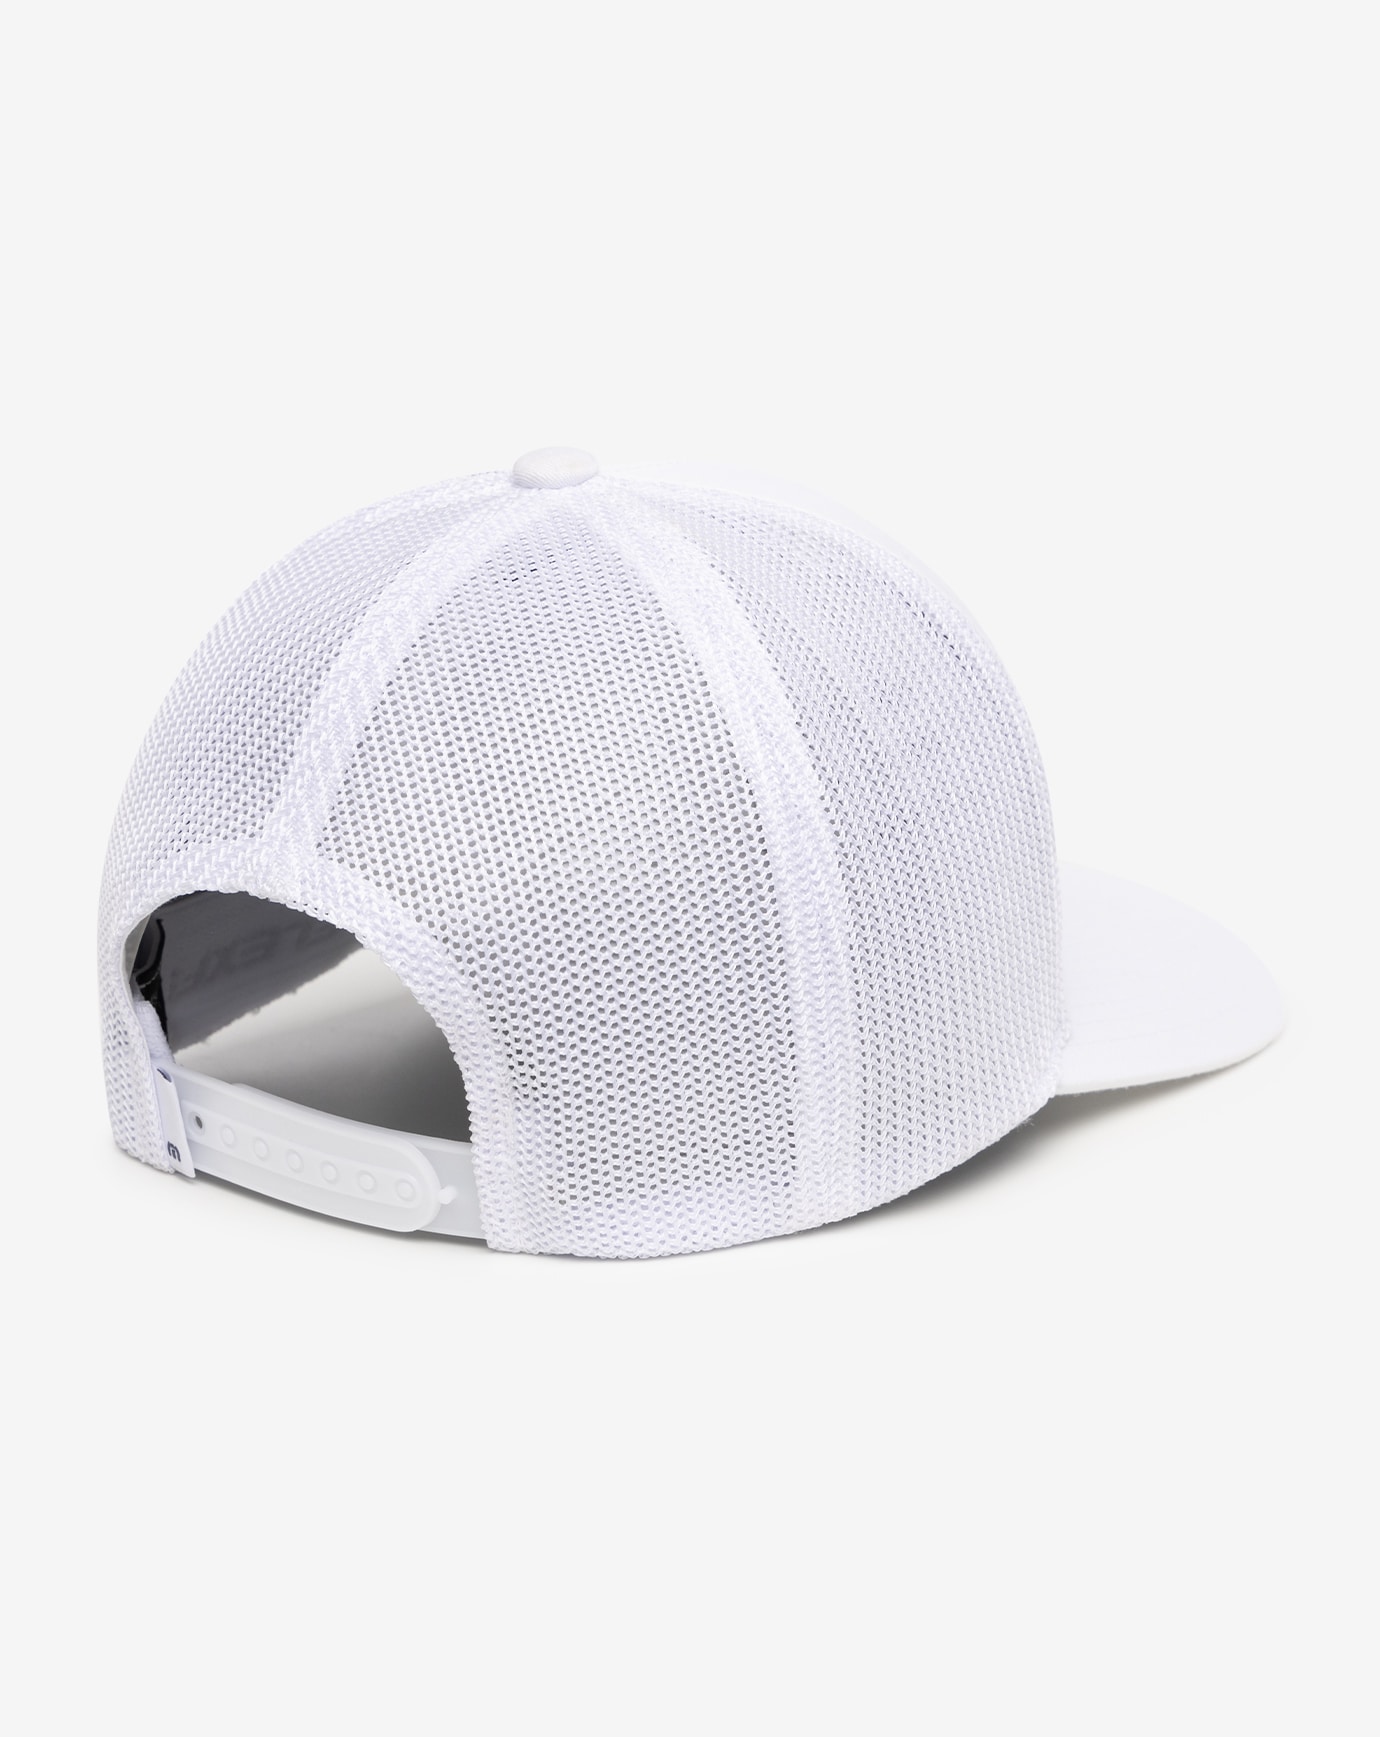 HEAT OF THE DAY SNAPBACK HAT Image Thumbnail 3